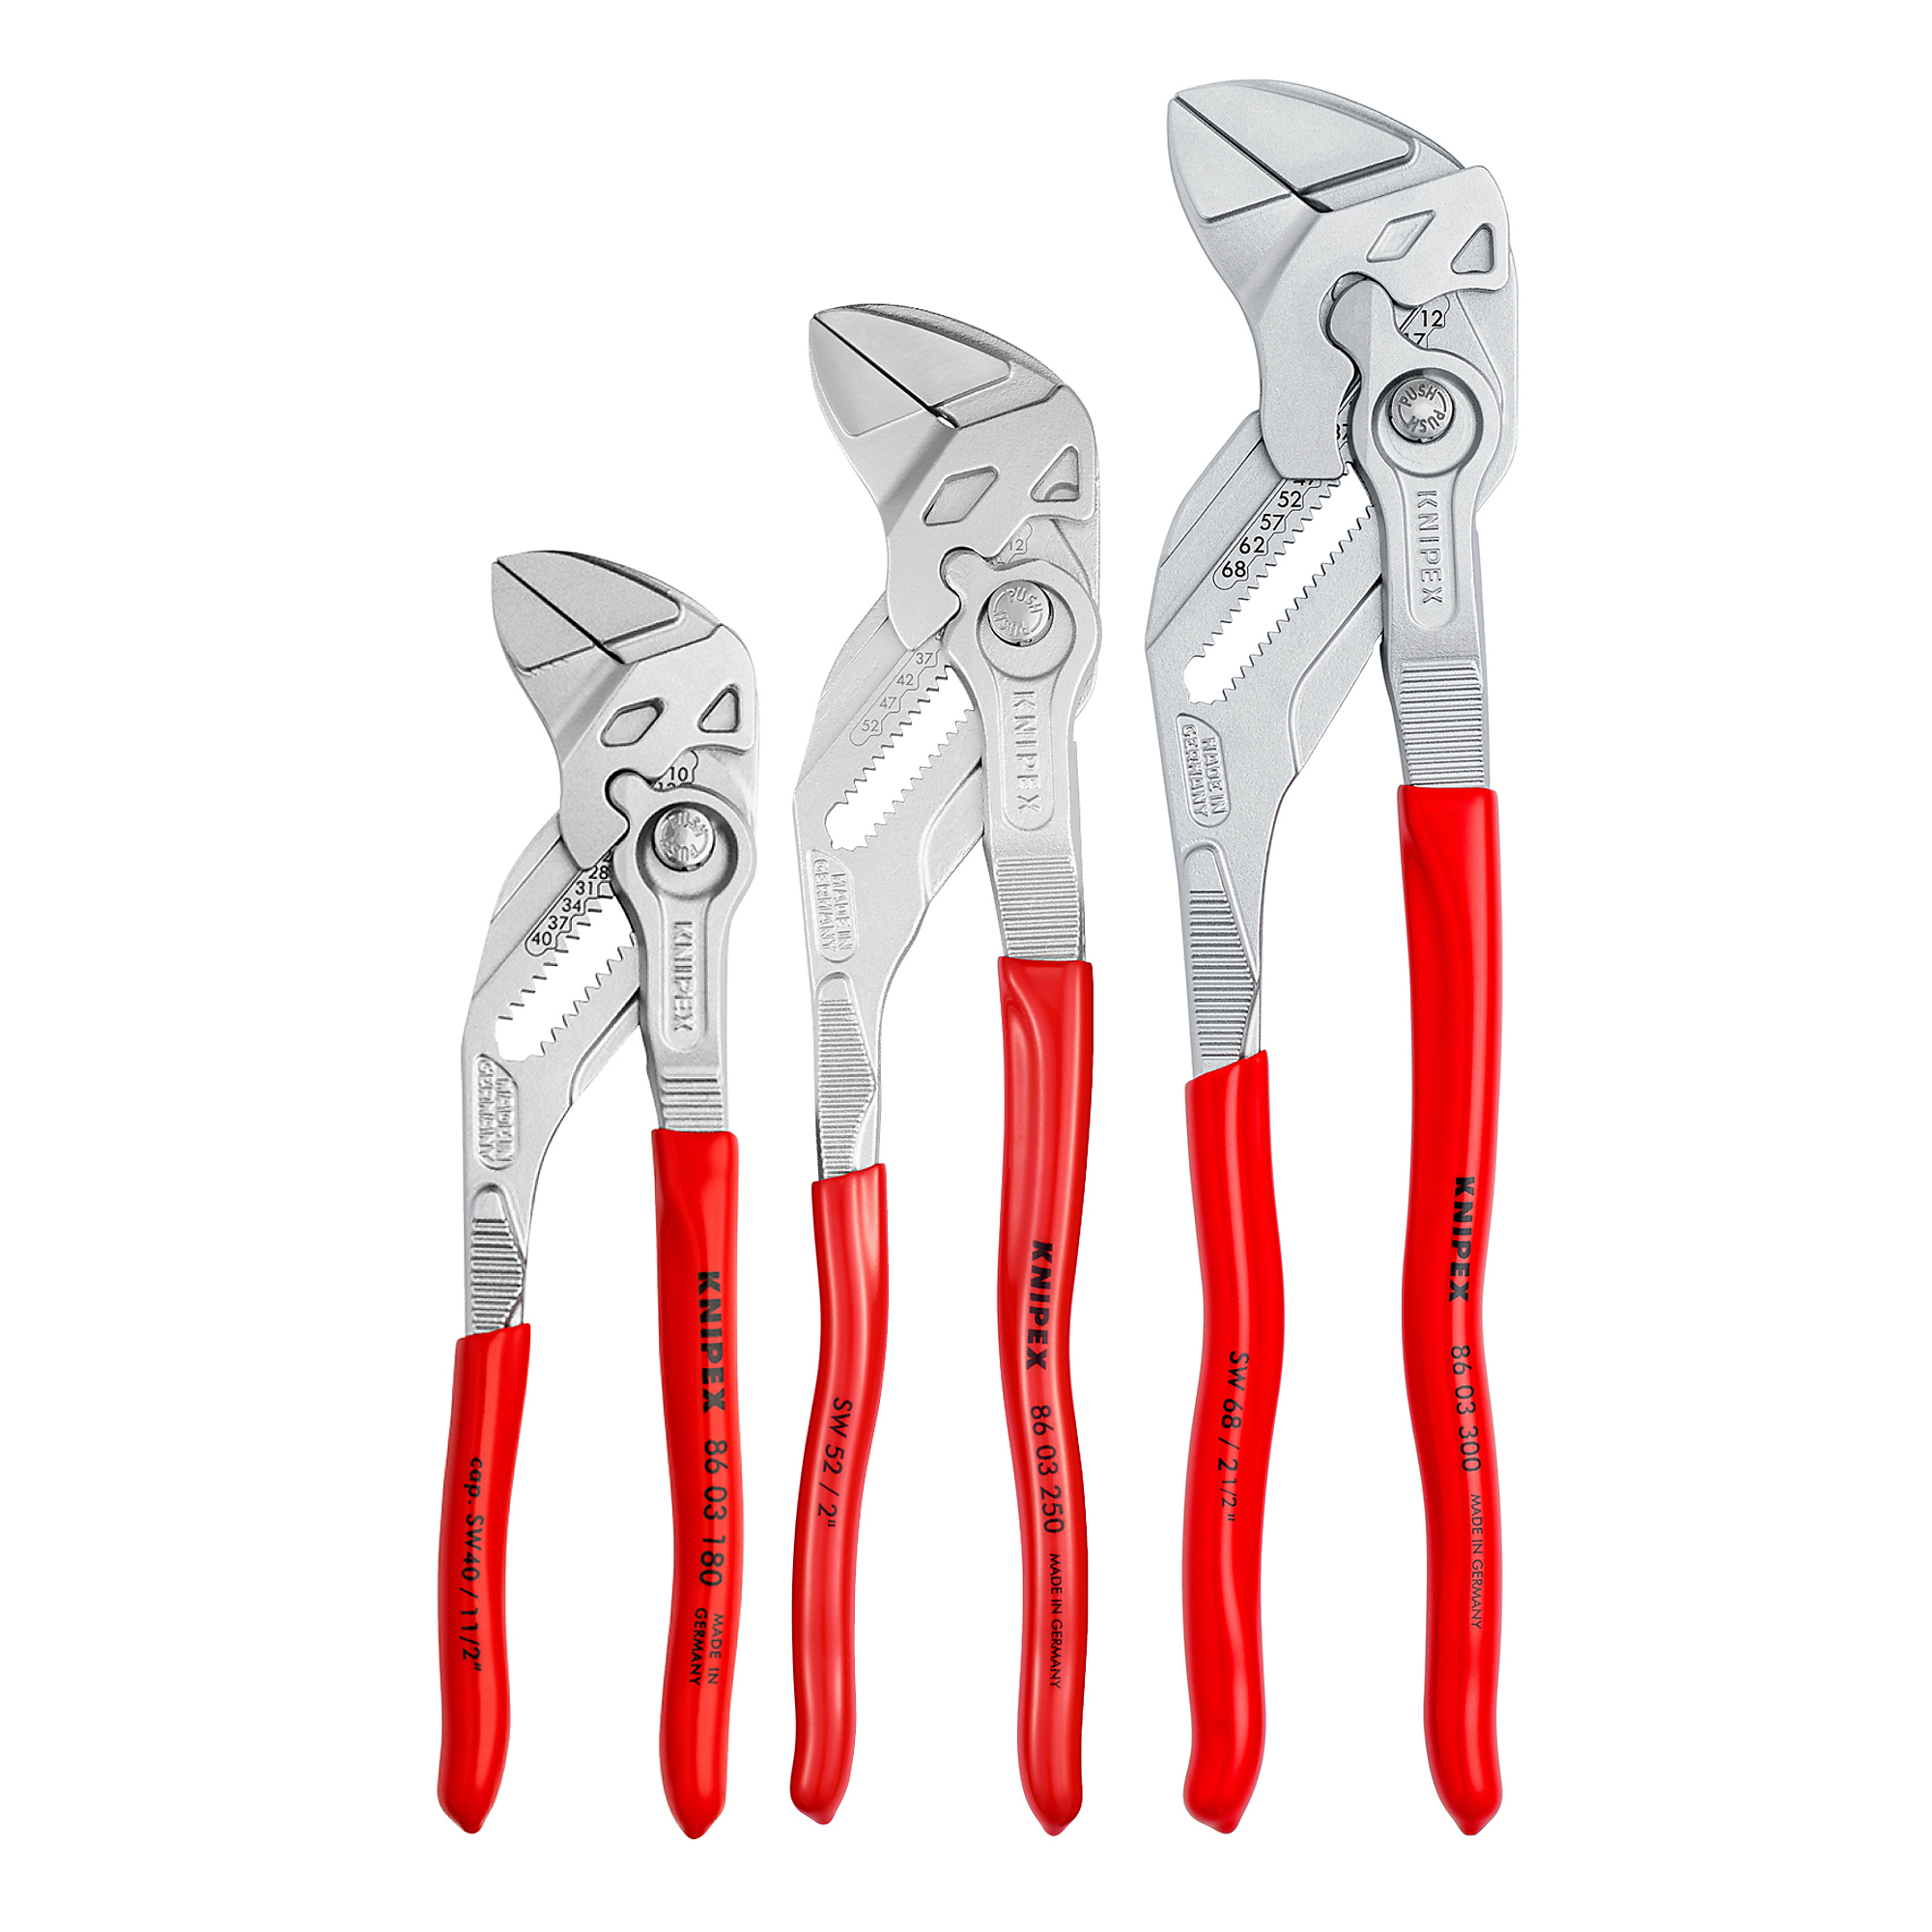 KNIPEX, 3PC Pliers Wrench Sets, Plastic coating, Pieces (qty.) 3, Material Chrome Vanadium, Model 00 20 06 US2